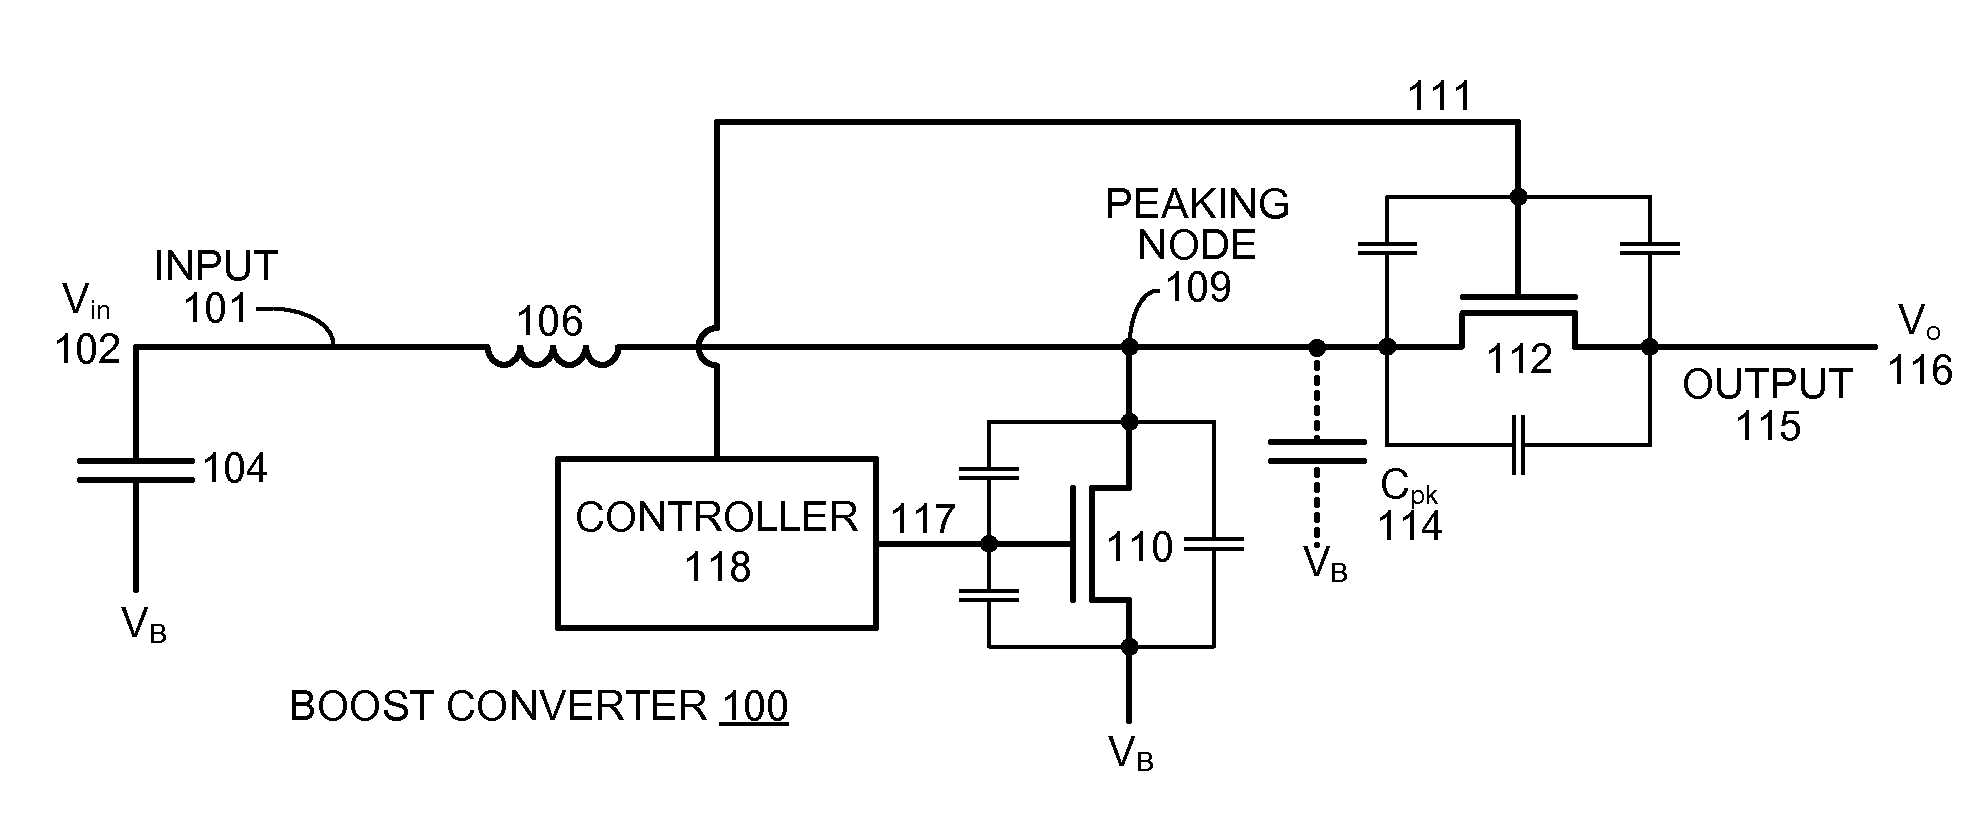 Resonant-recovery power-reduction technique for boost converters